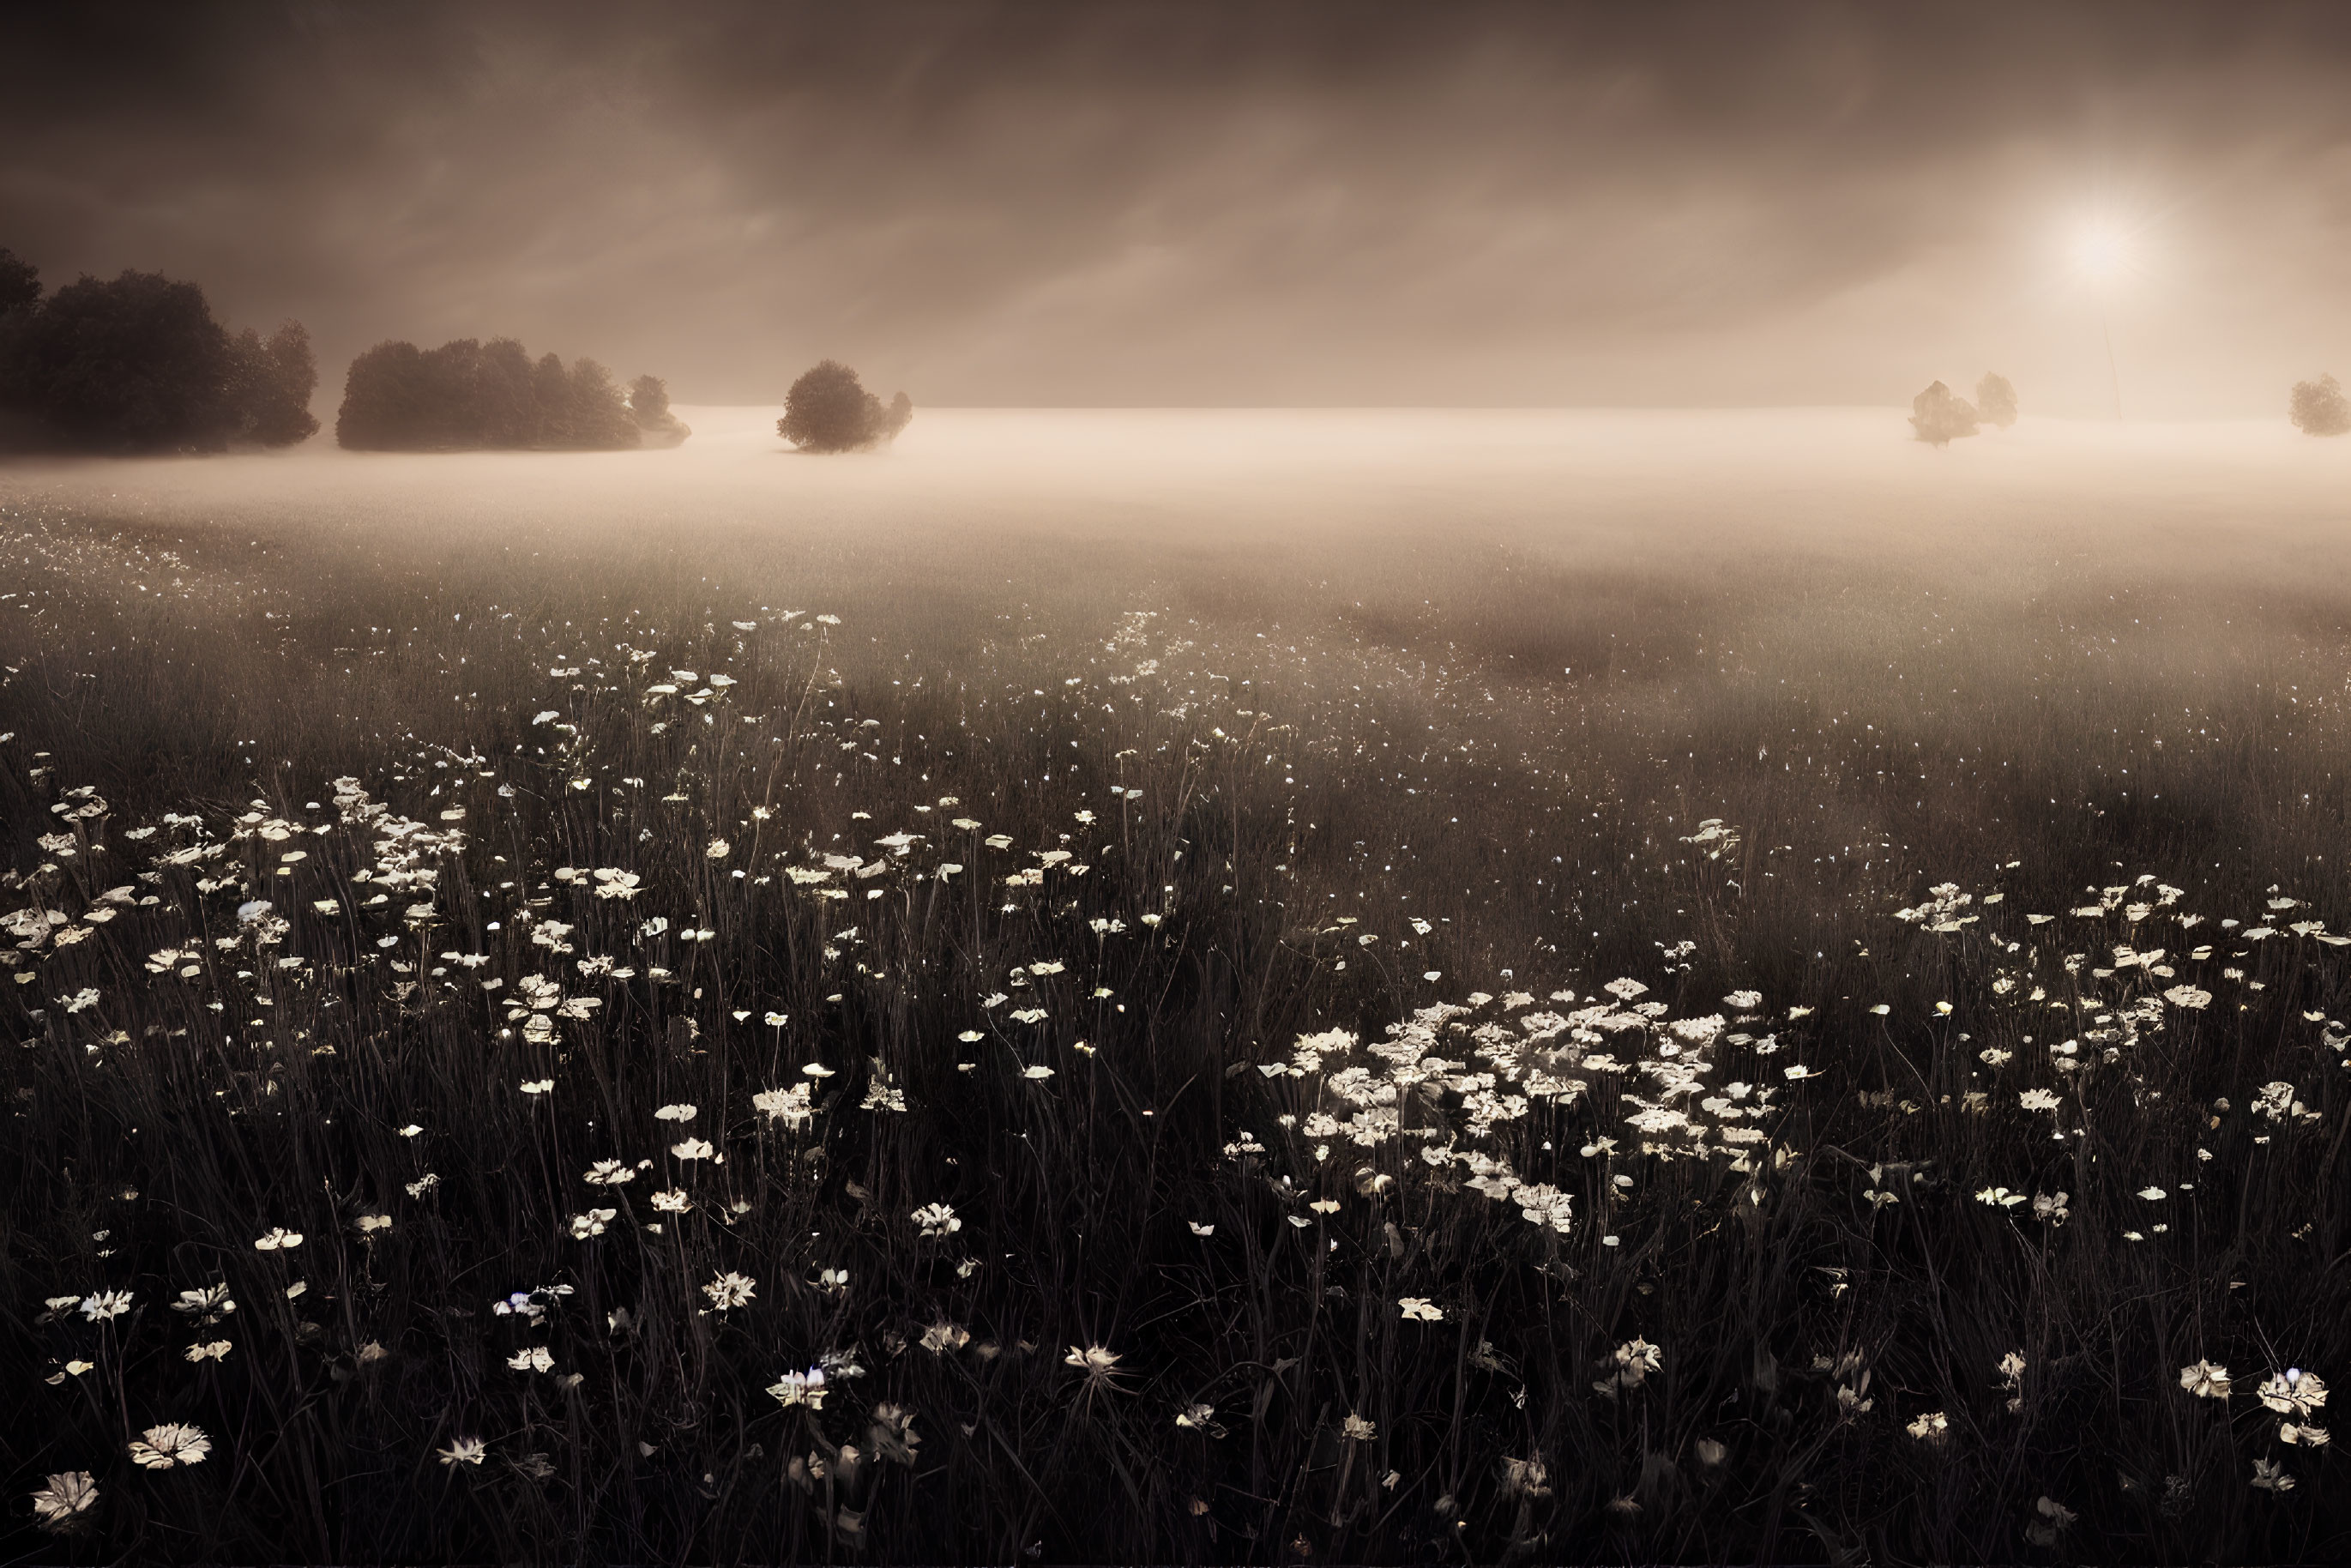 Sepia-Toned Field of Daisies with Trees and Misty Sky